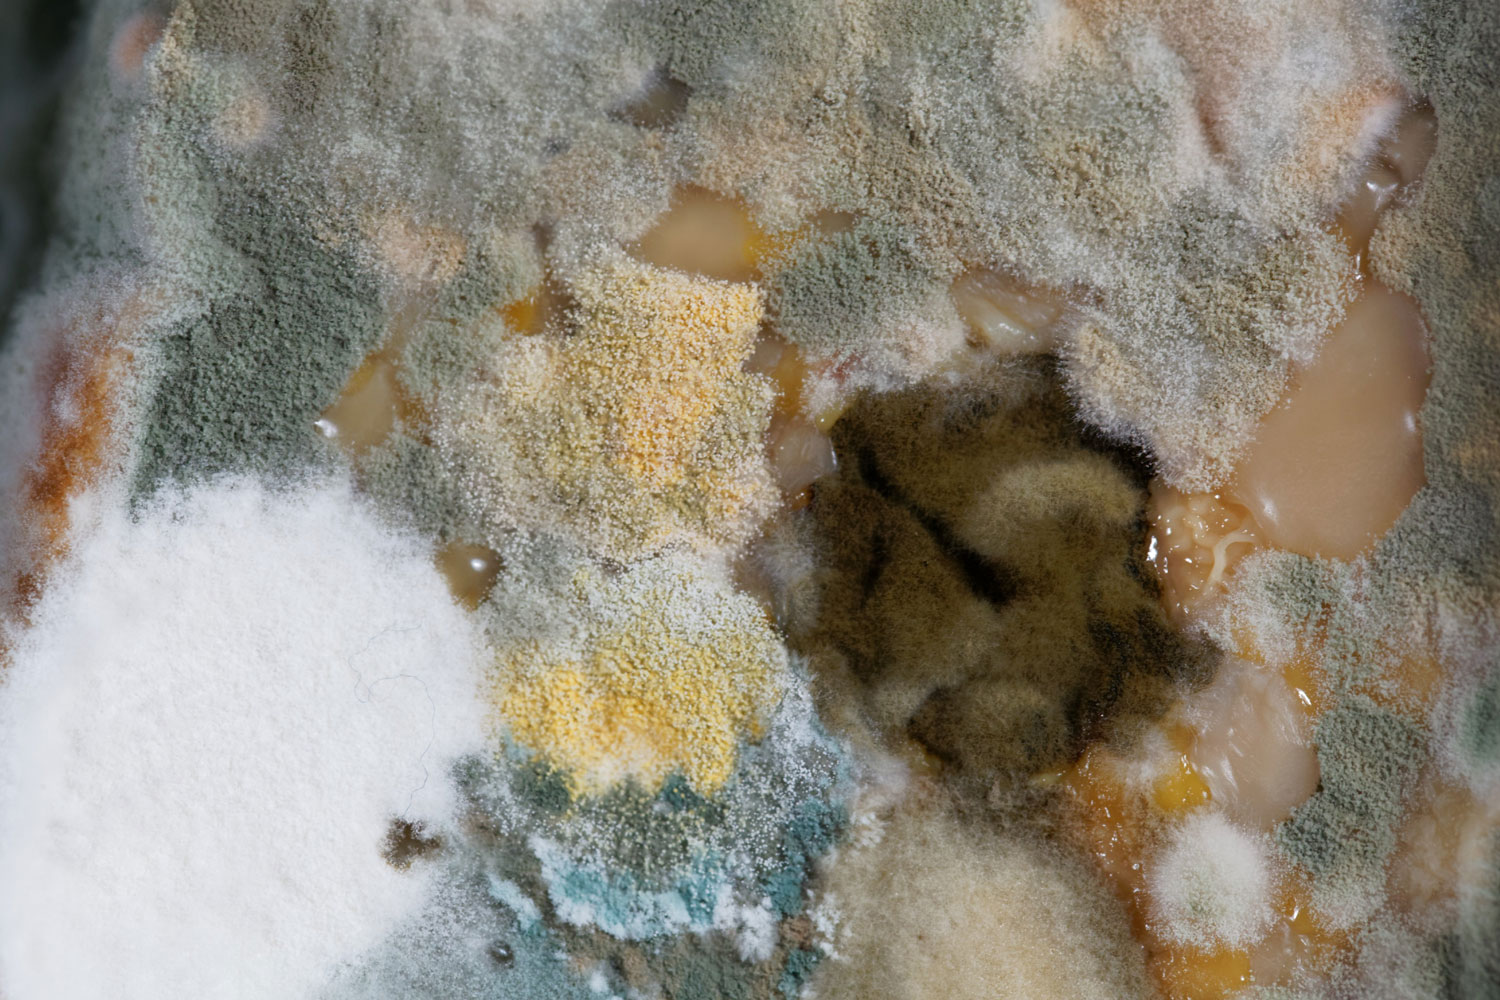 Mold growth cause by too much moisture